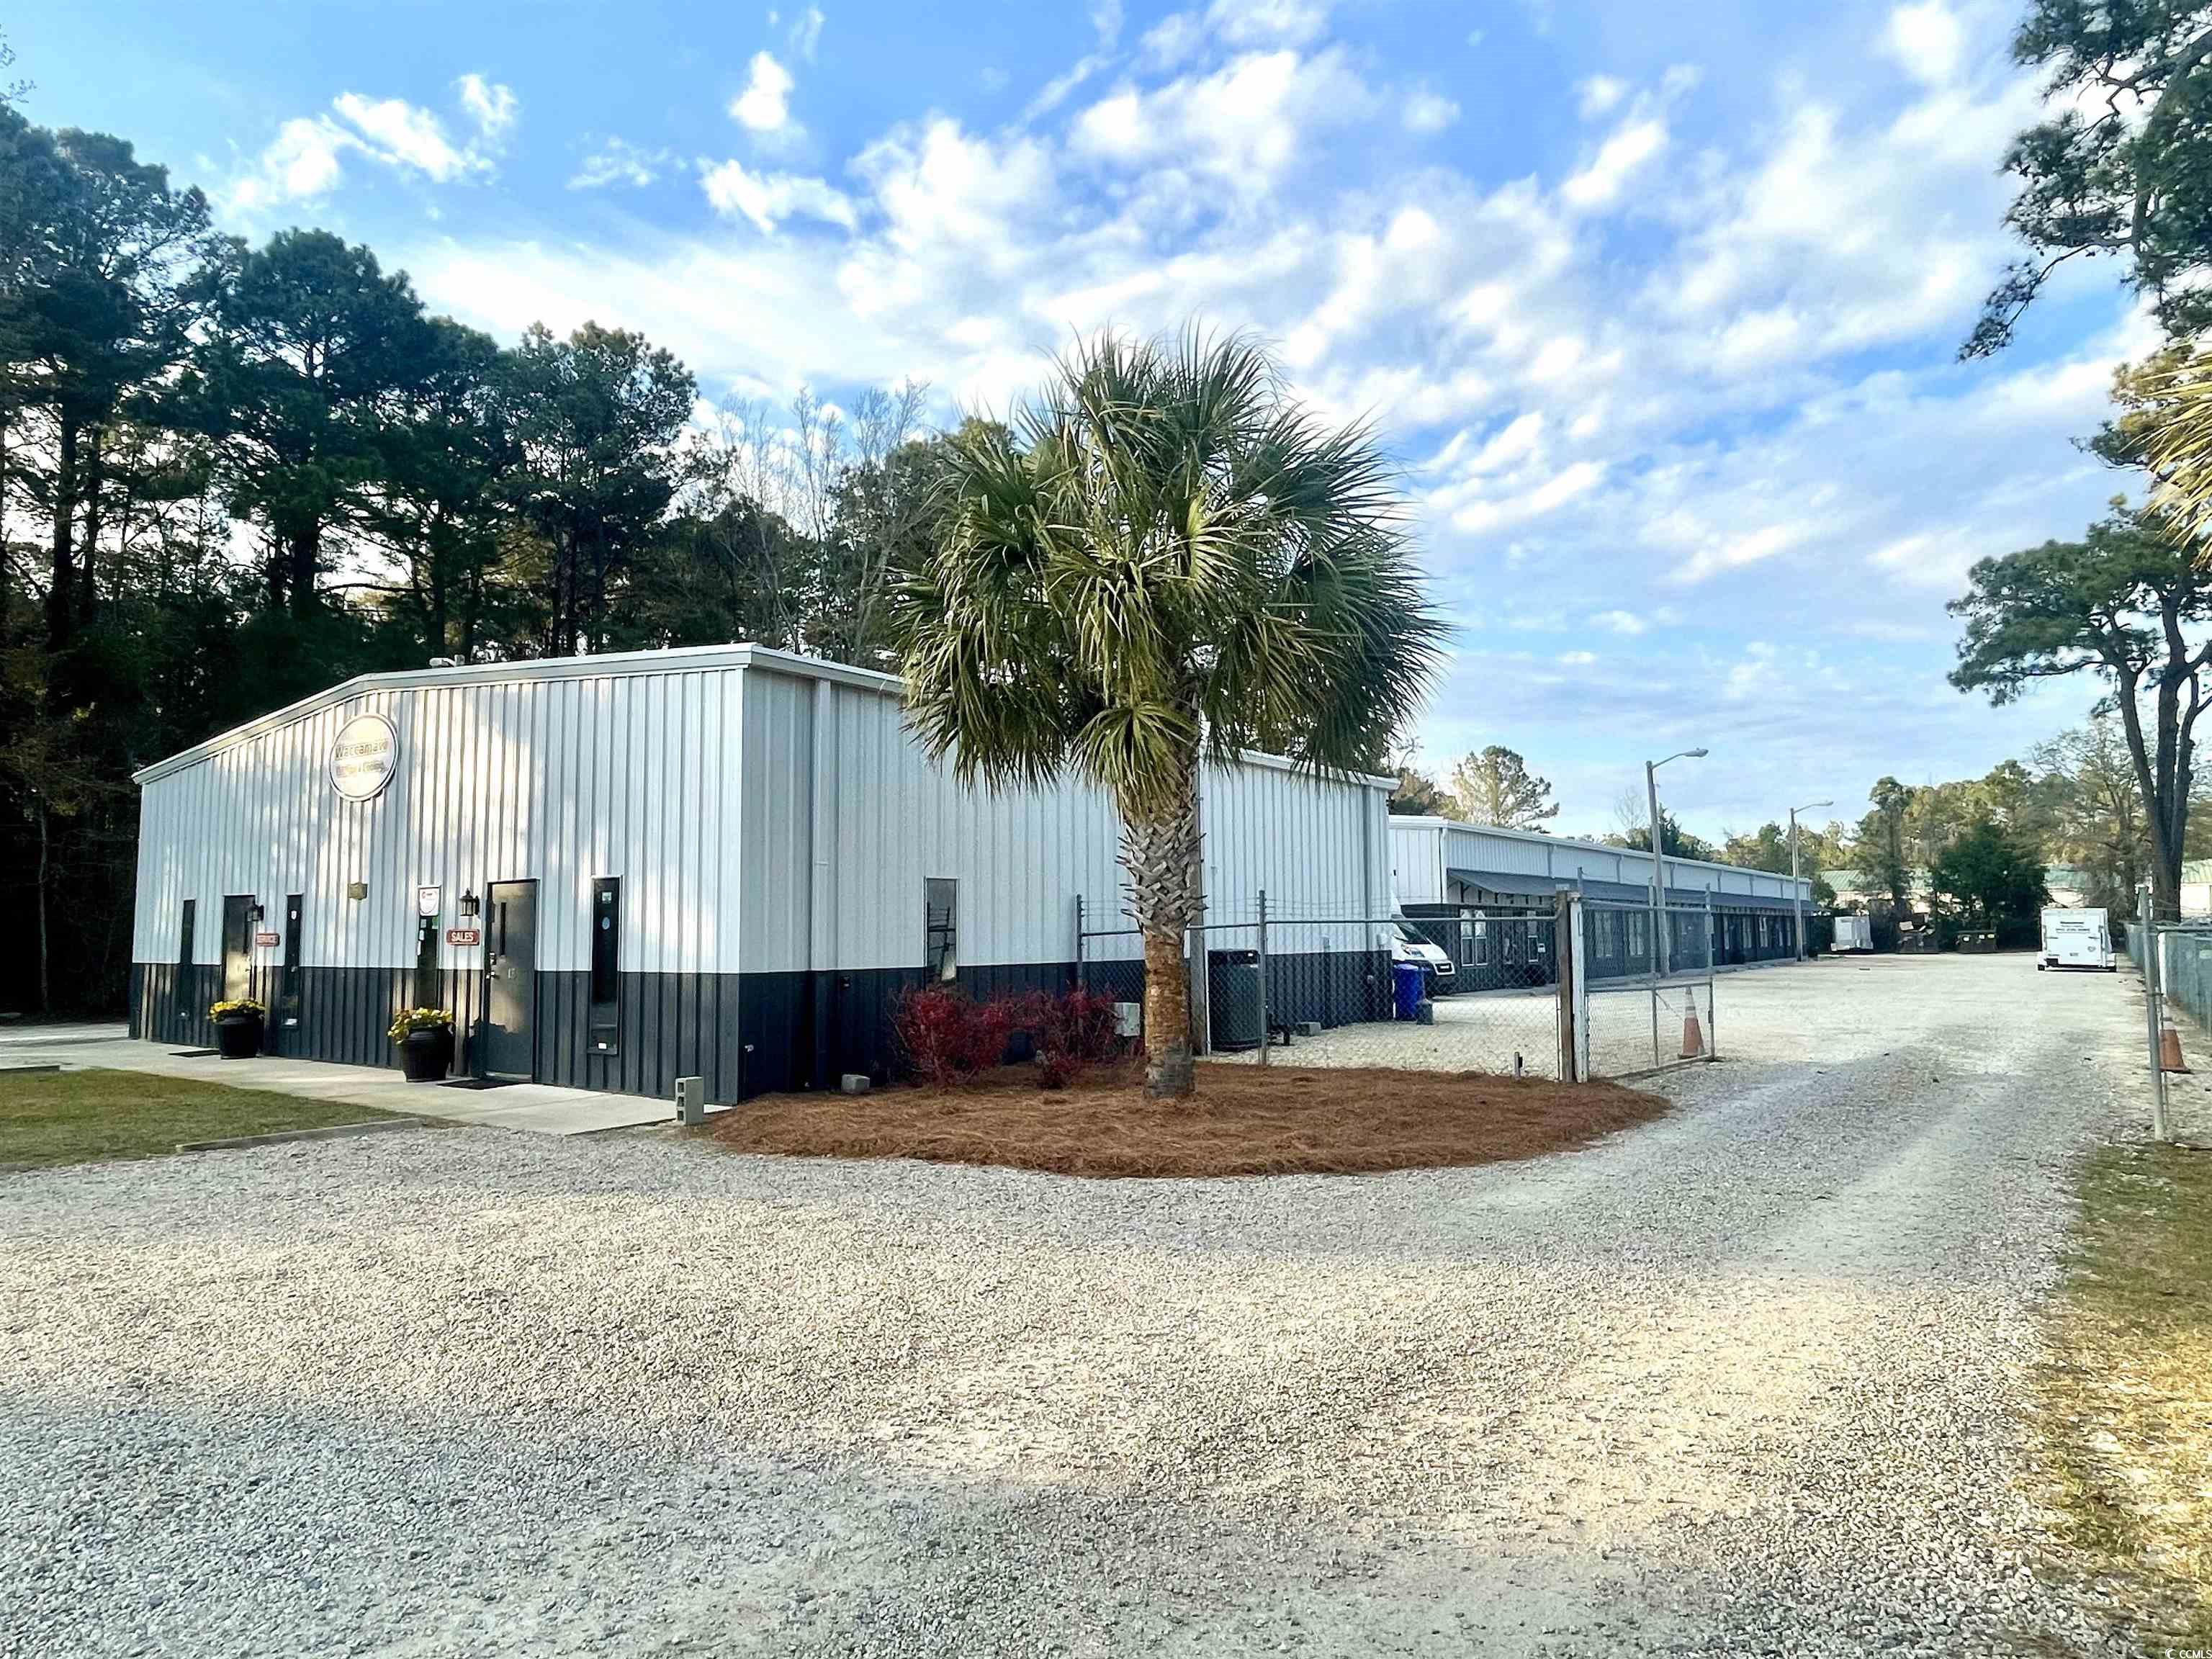 space available july 1, 2024.   warehouse space in the heart of pawleys island. the property has easy access to highway 17 and is in close proximity to the major retail and residential areas of pawleys. this site is ideal for businesses that service areas from georgetown to myrtle beach. property improvements underway include new exterior paint and landscaping, installation of a new monument sign, branding and way-finding signage, new storefront entryways and roll form awnings, repairing/replacing roofs and roll up doors, and filling holes in gravel driveway. zoning: resort service, county of georgetown, sc.  industrial space up to 14,810 coming available soon.